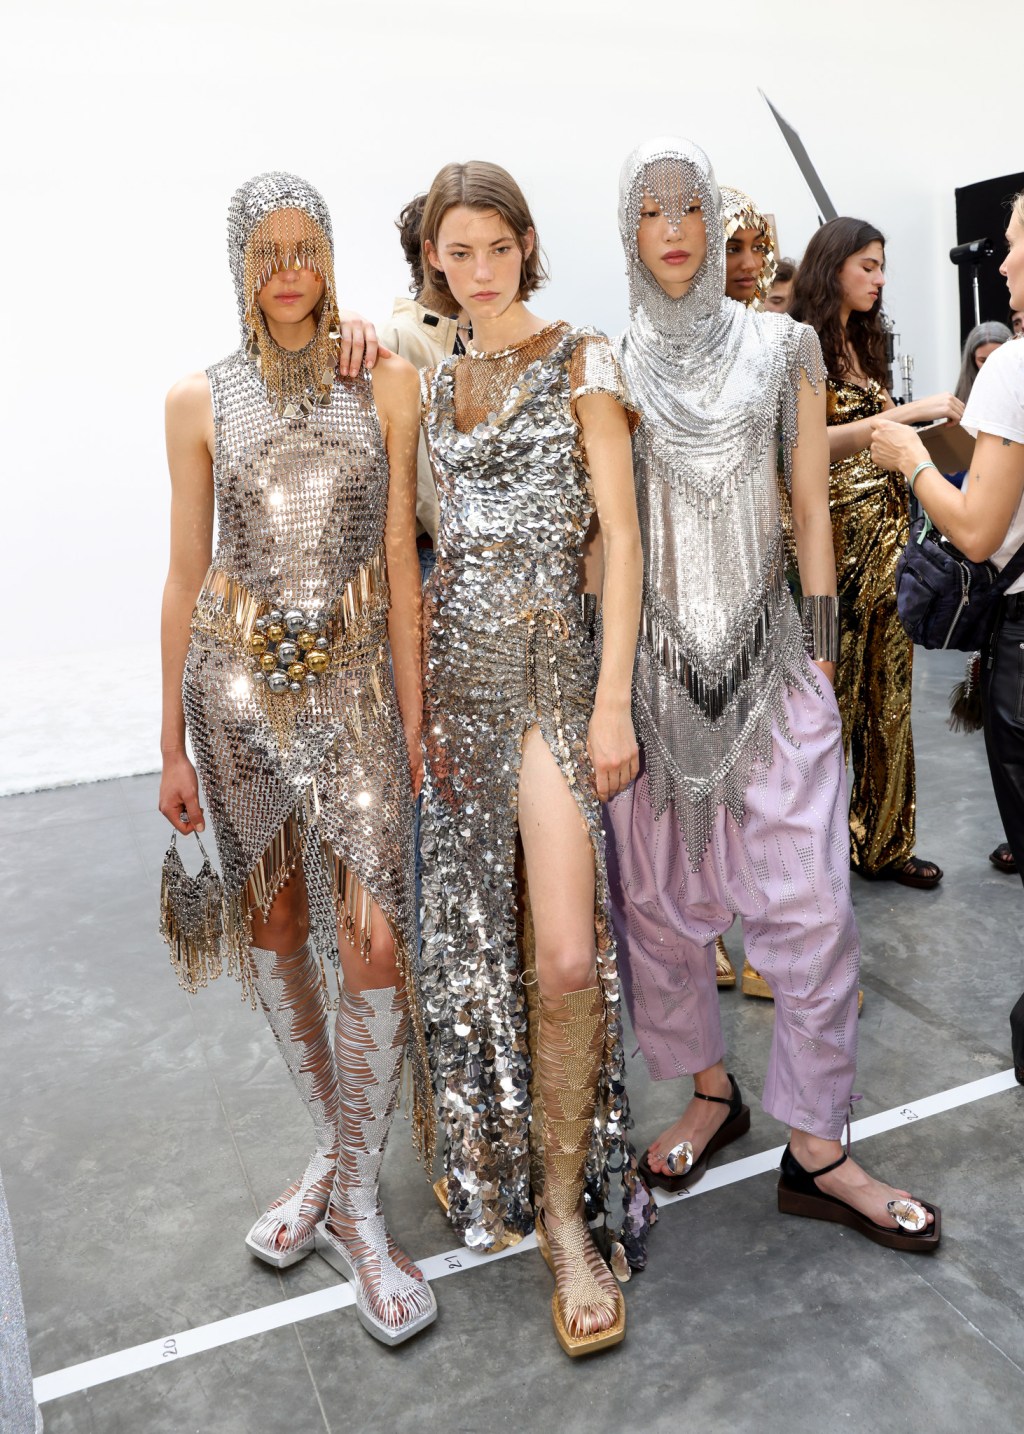 concert-fashion-means-metallics-are-in-for spring